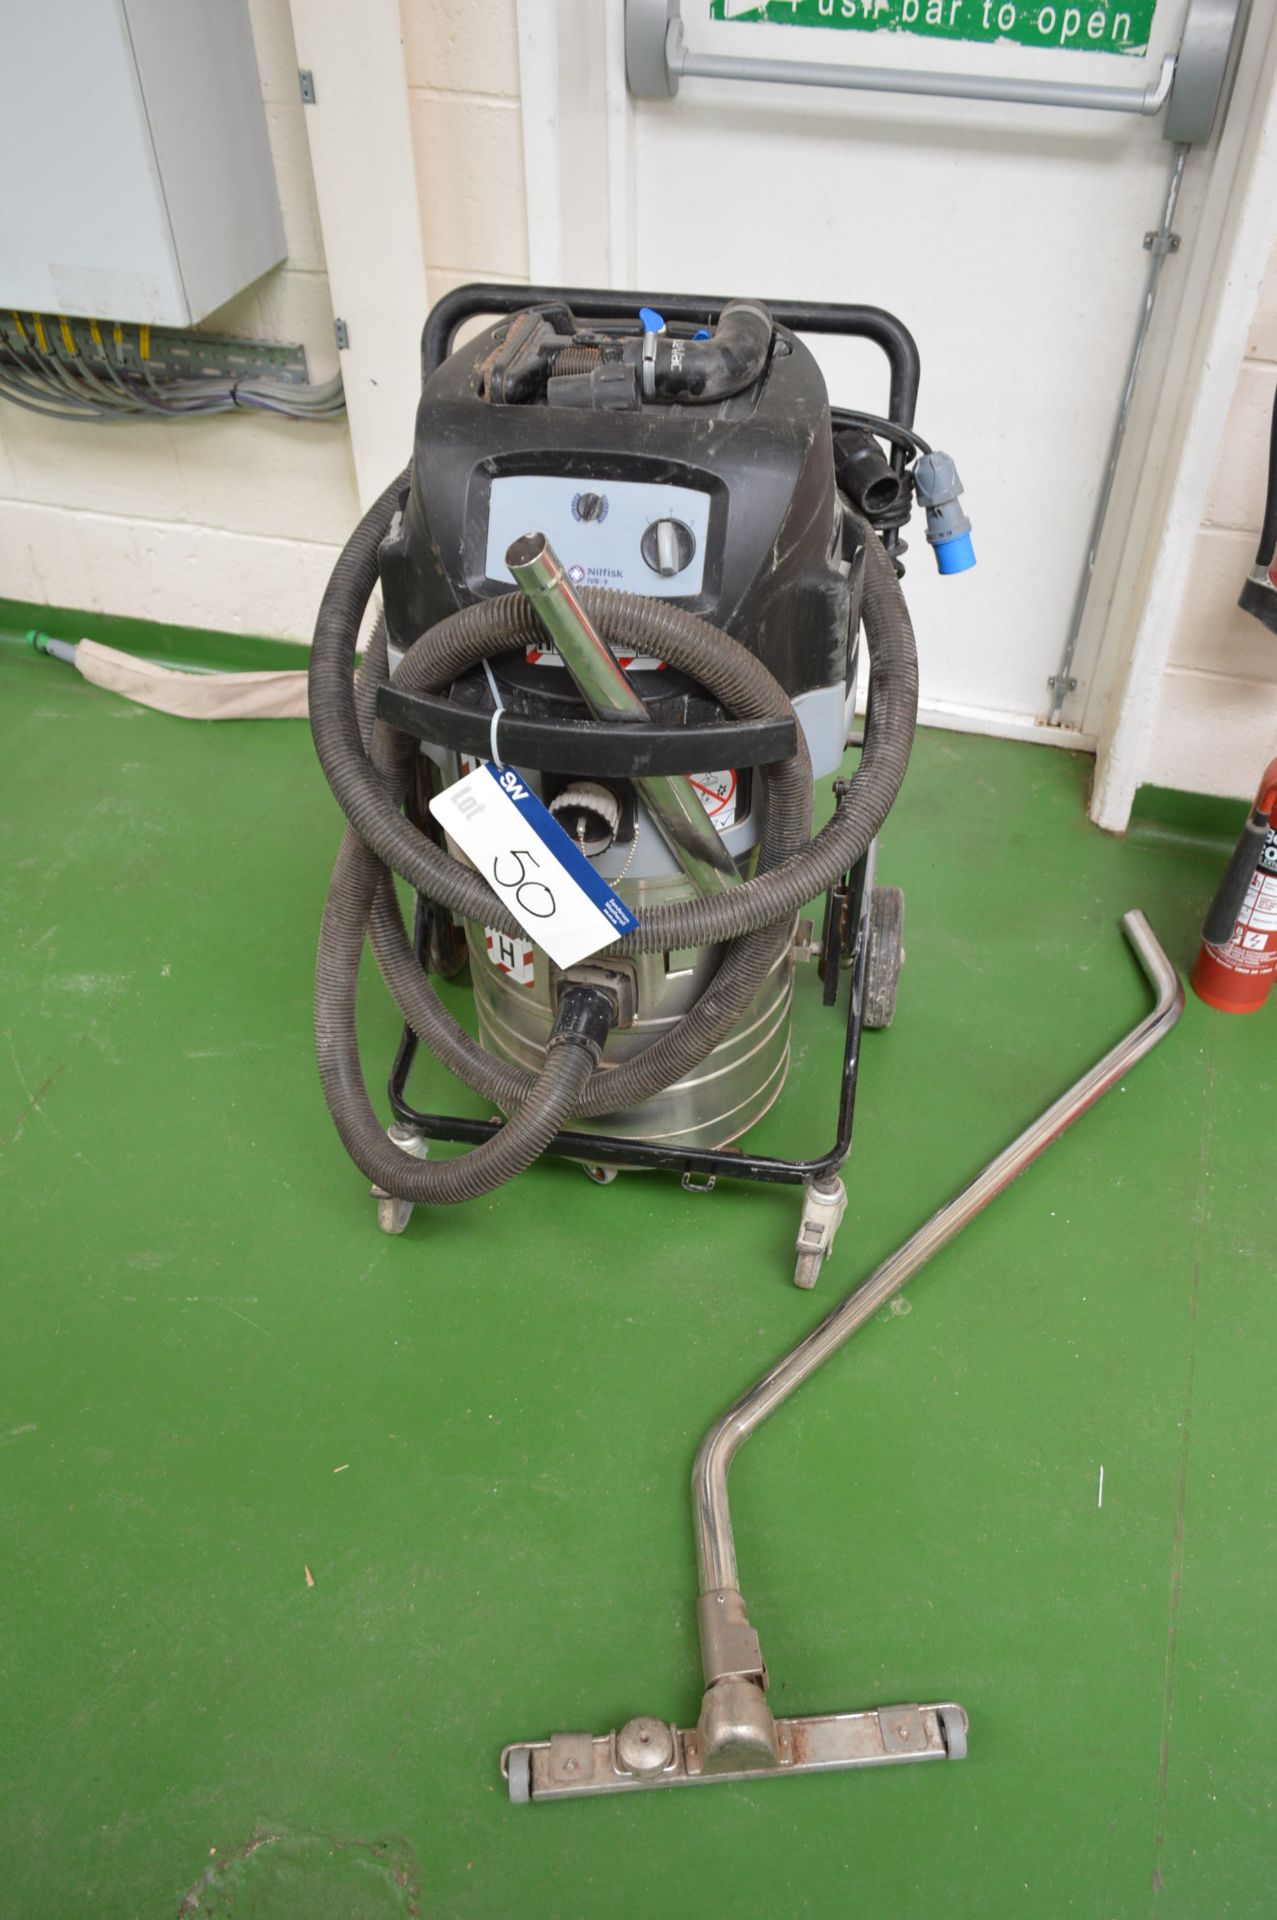 Nilfisk IVB/9 Portable Industrial Vacuum Cleaner (vendors comment - purchased new in 2016)